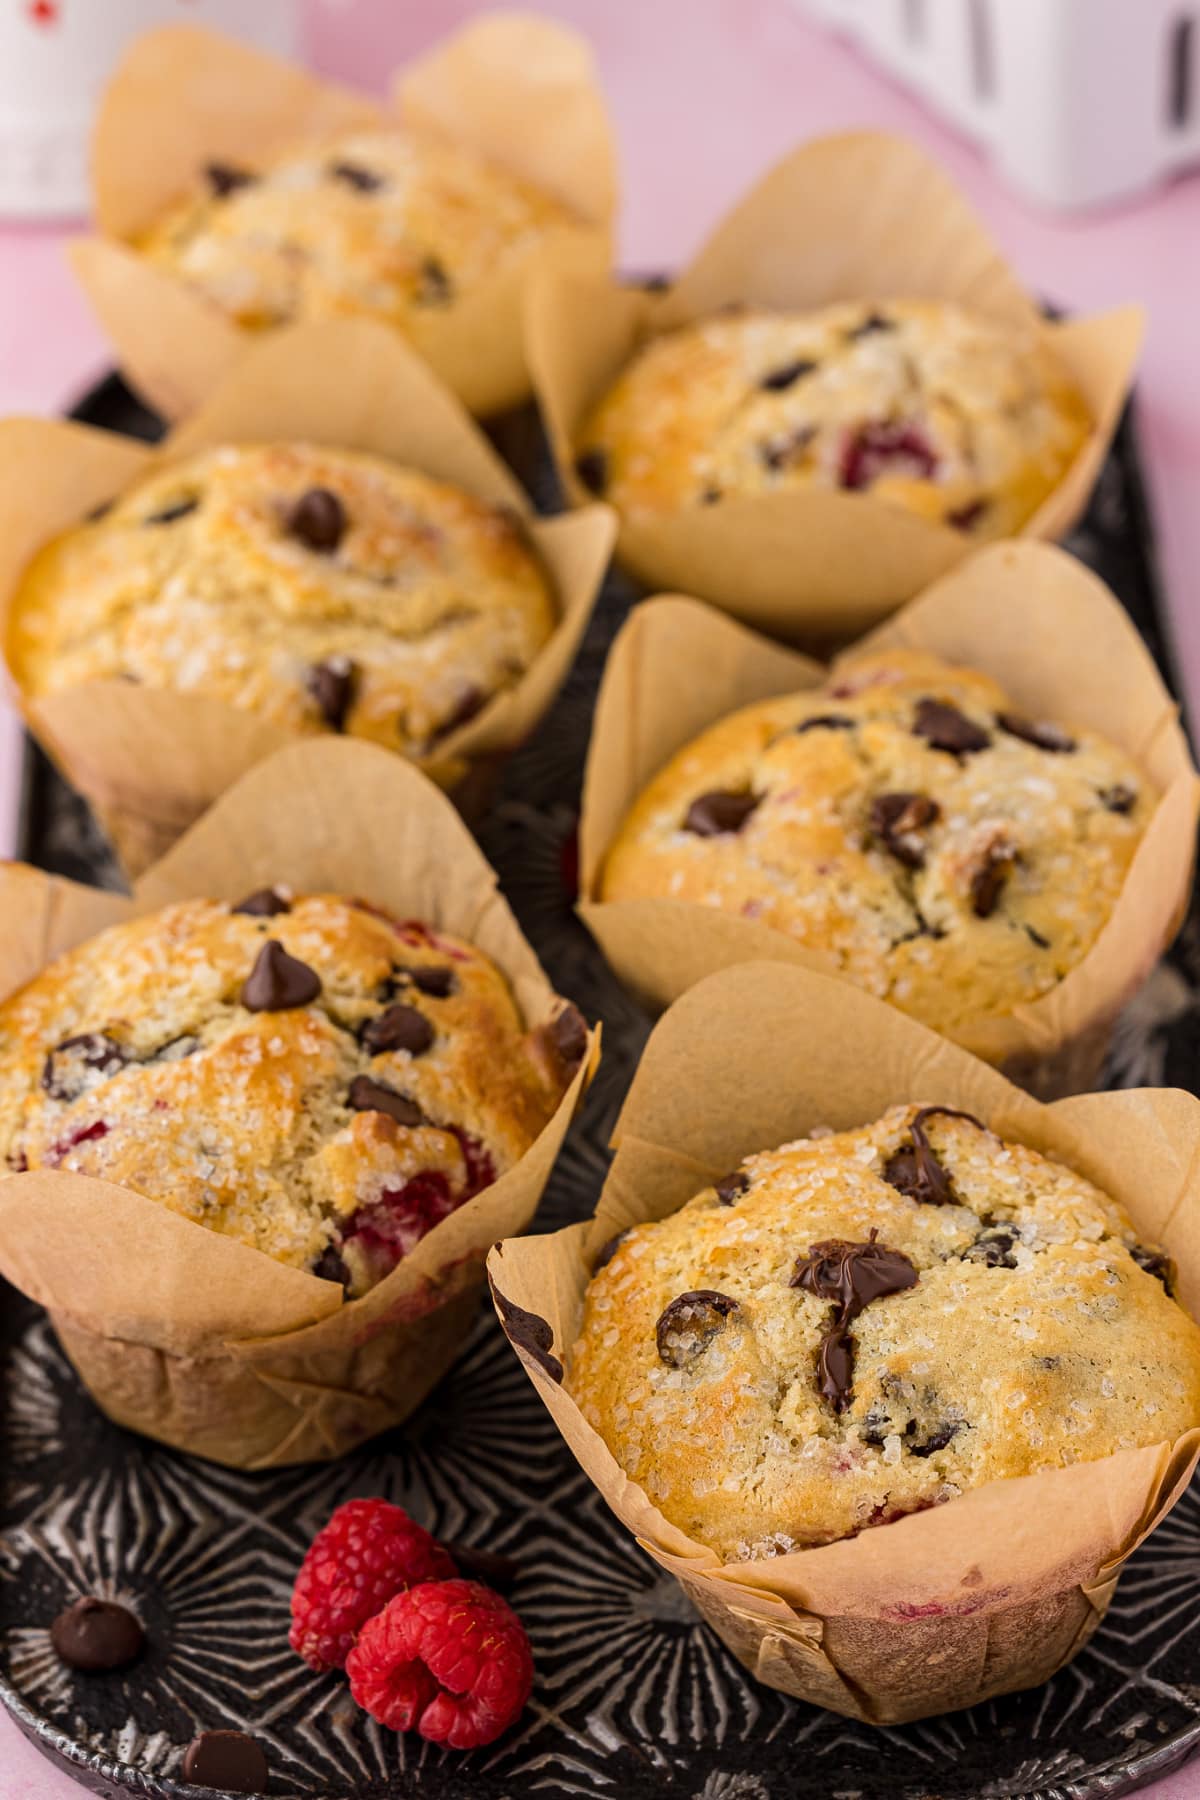 6 chocolate chip muffins wrapped in parchment paper sitting on a pretty tray